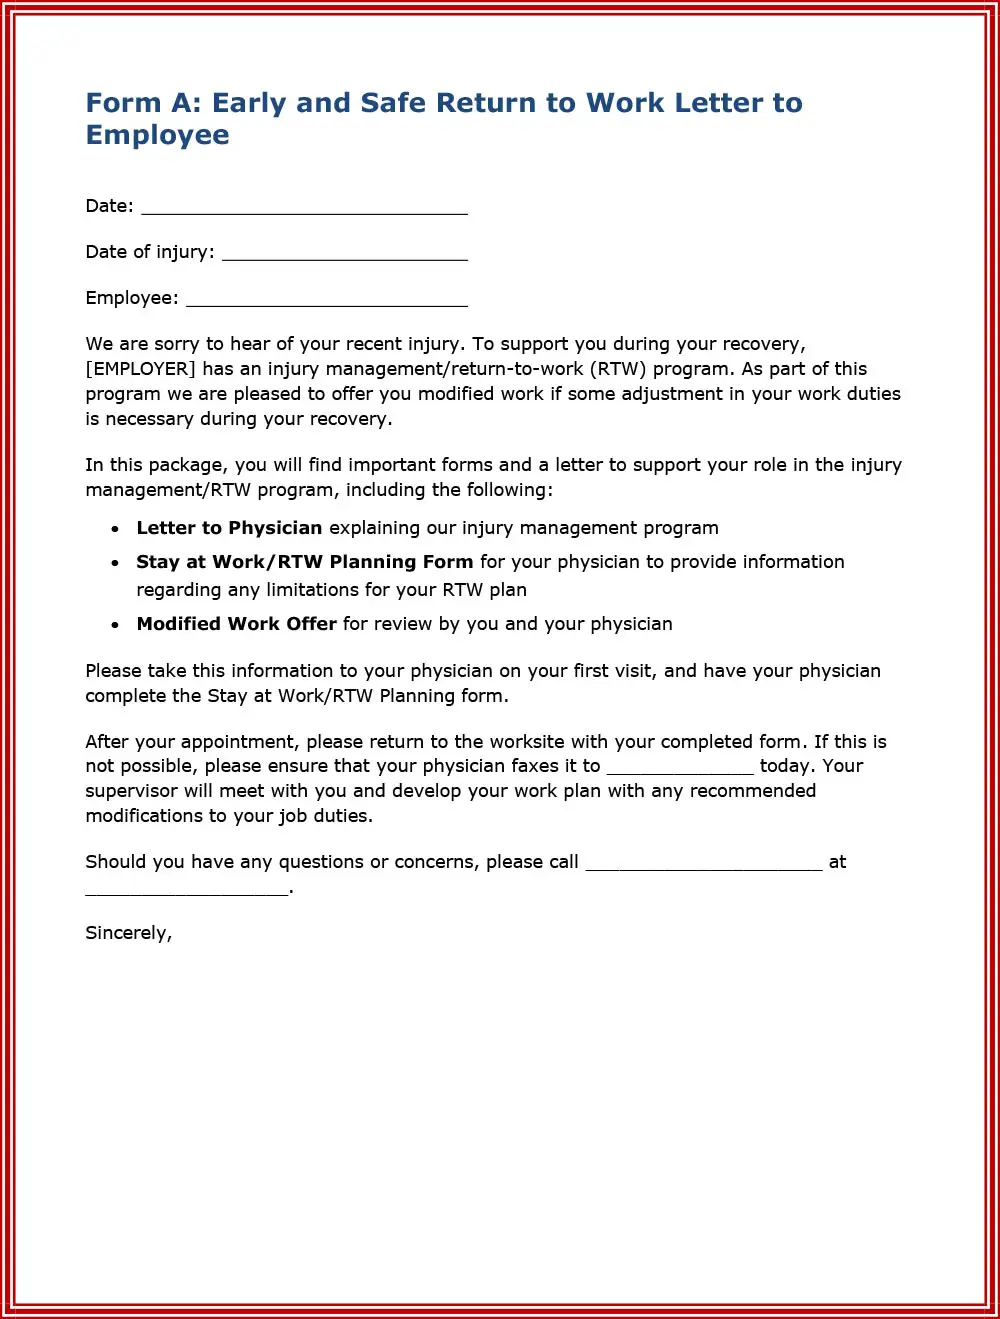 Editable retrun to work letter from employer to employee